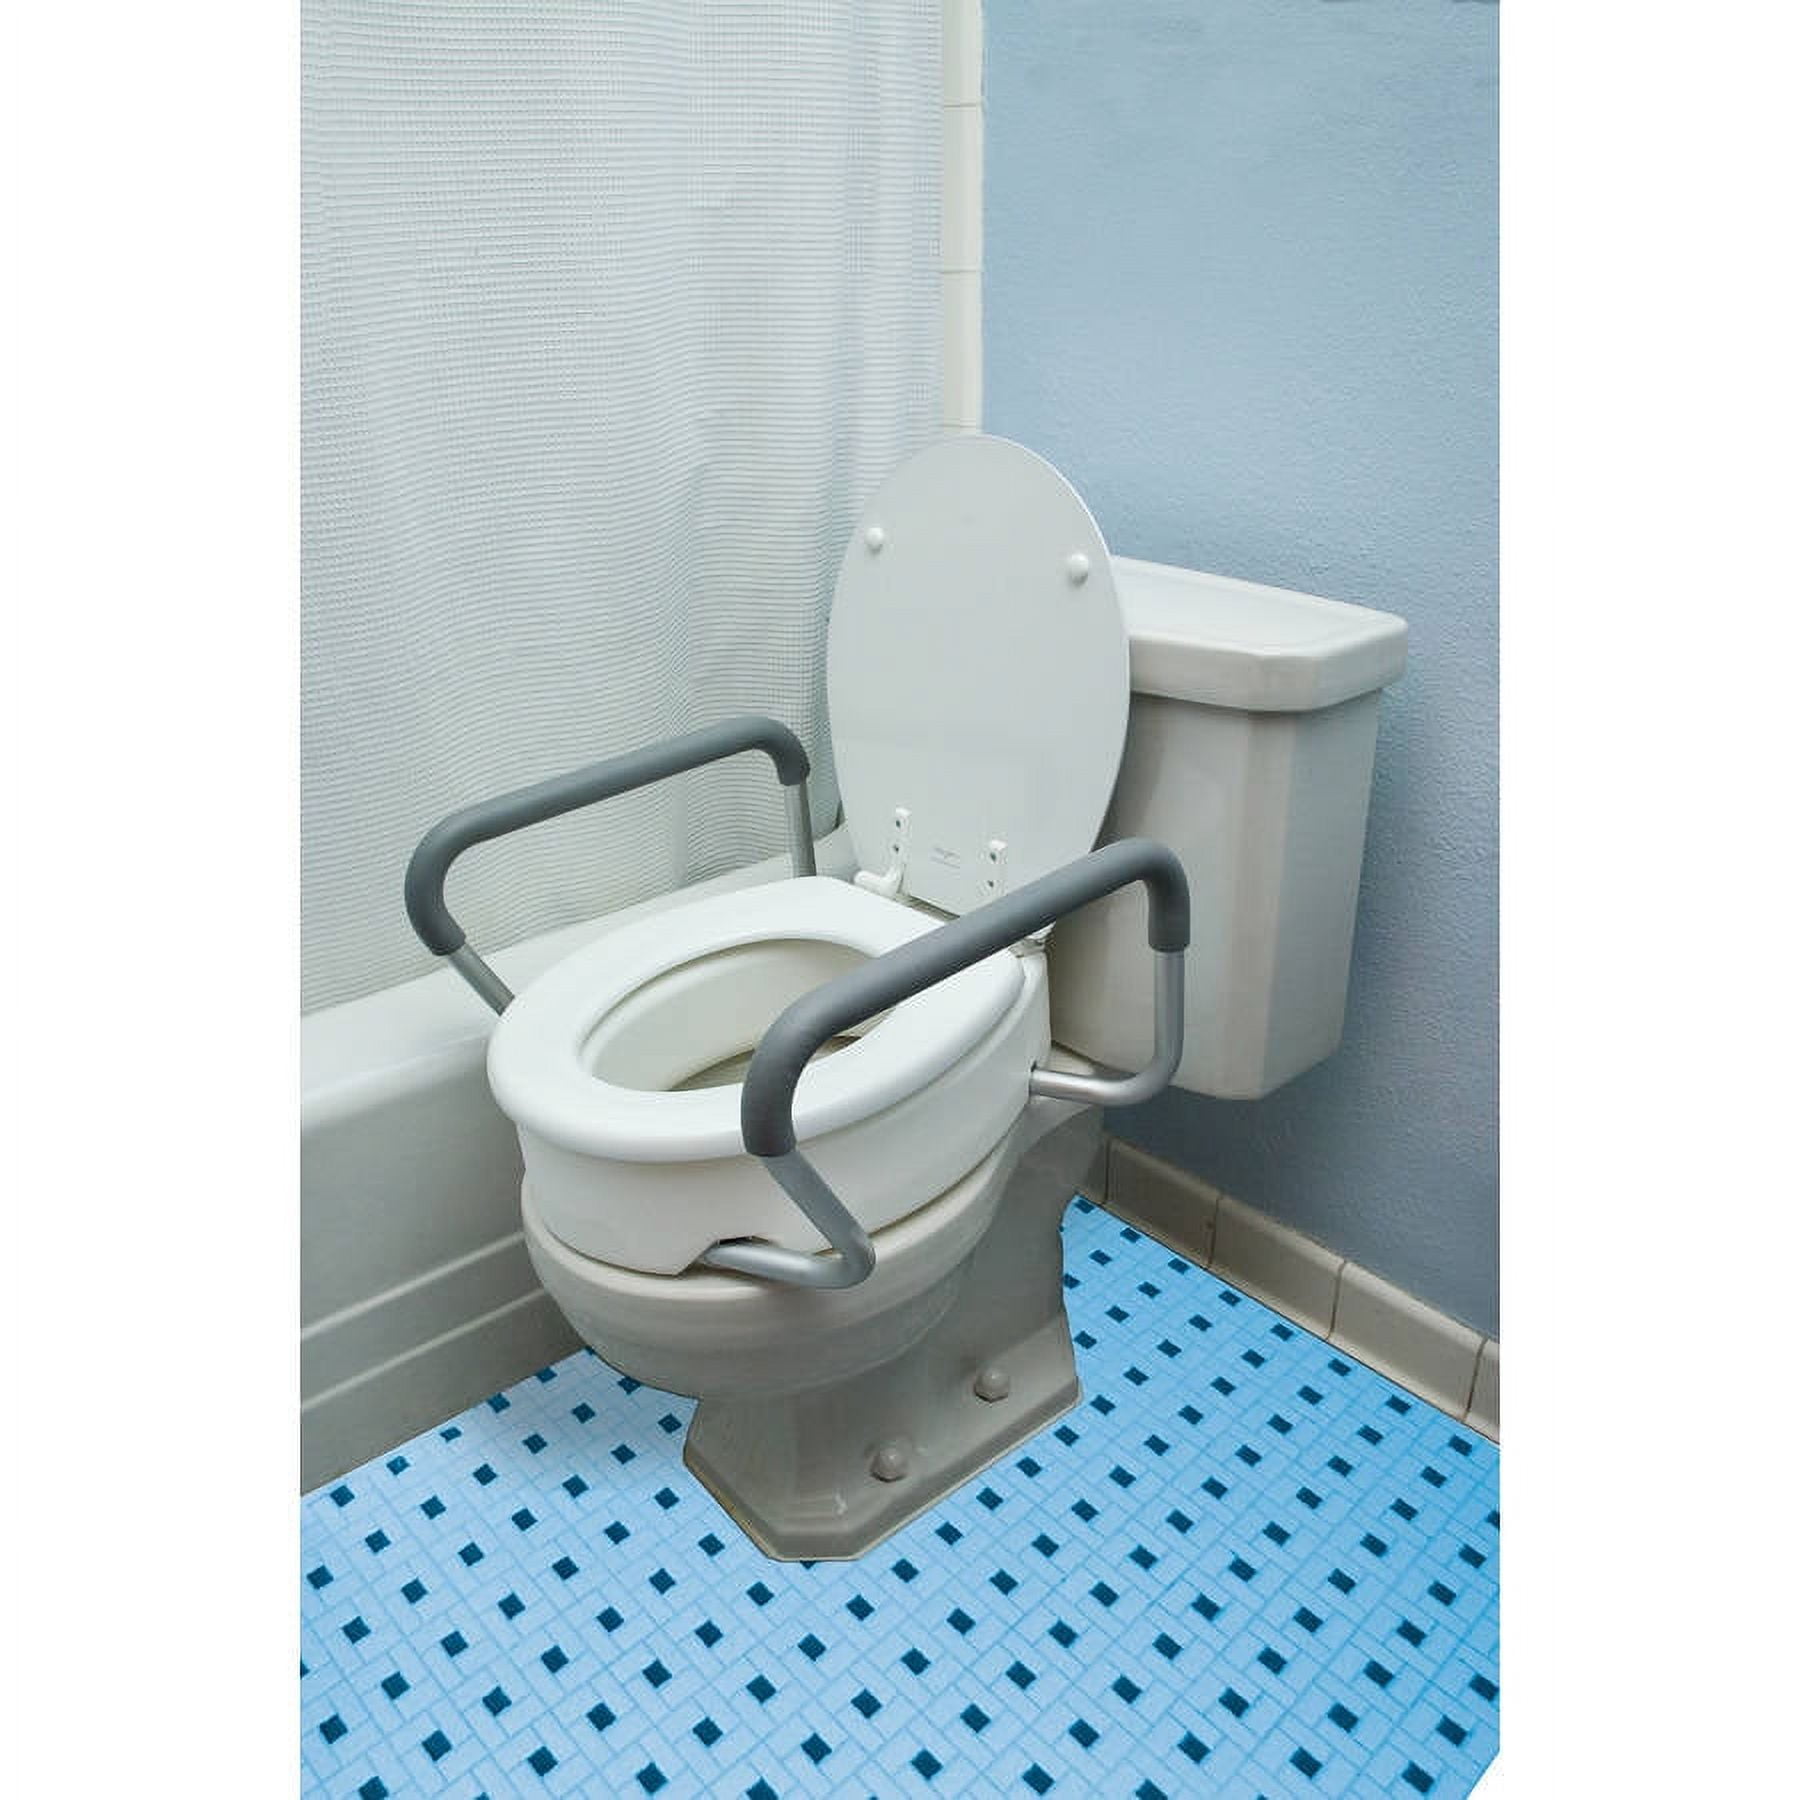 How To Find The Best Raised Toilet Seat – Forbes Health